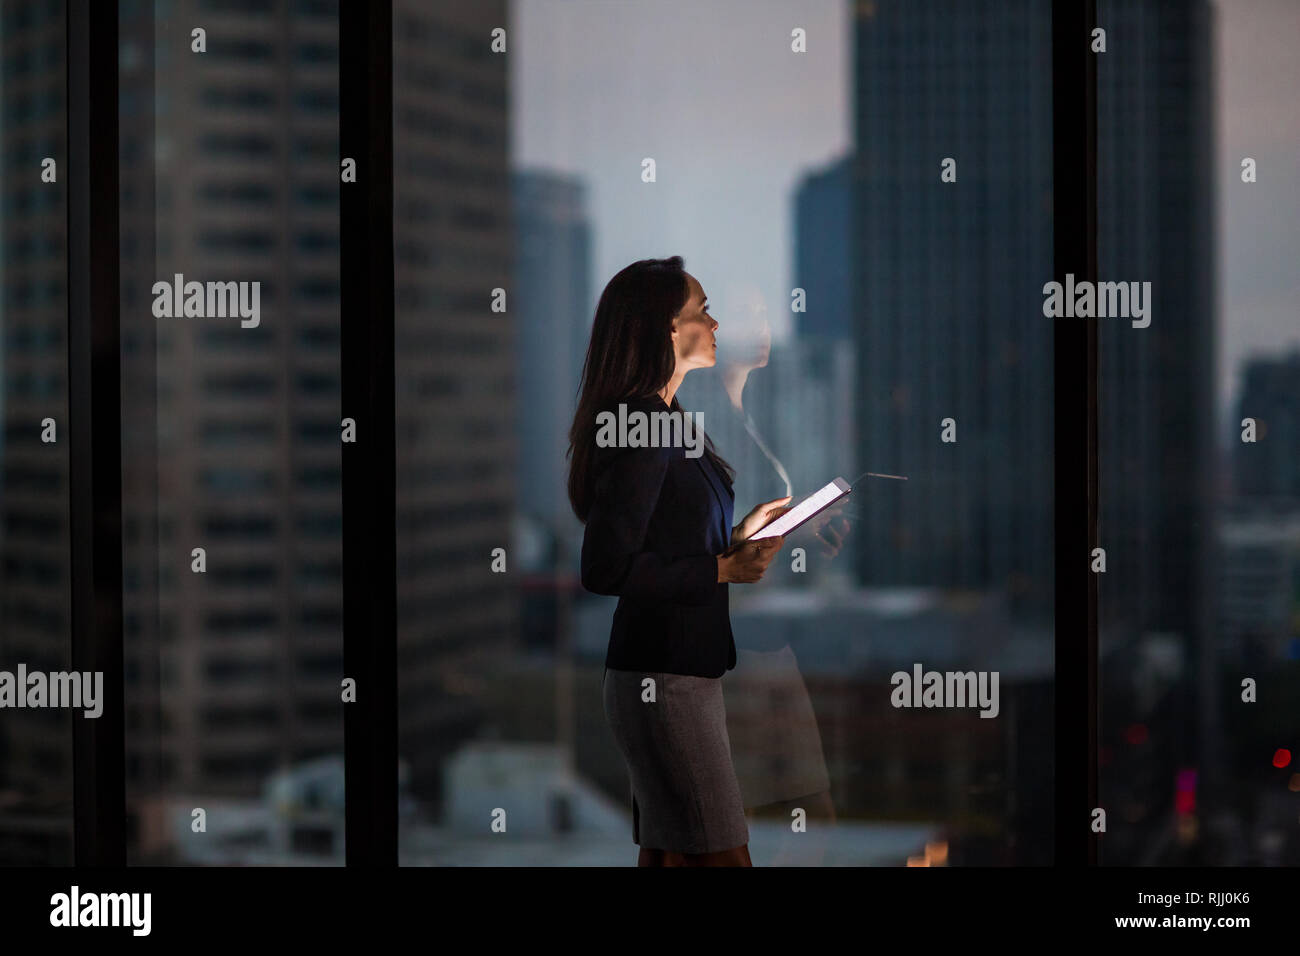 Businesswoman working late using digital tablet with city skyline in background Stock Photo